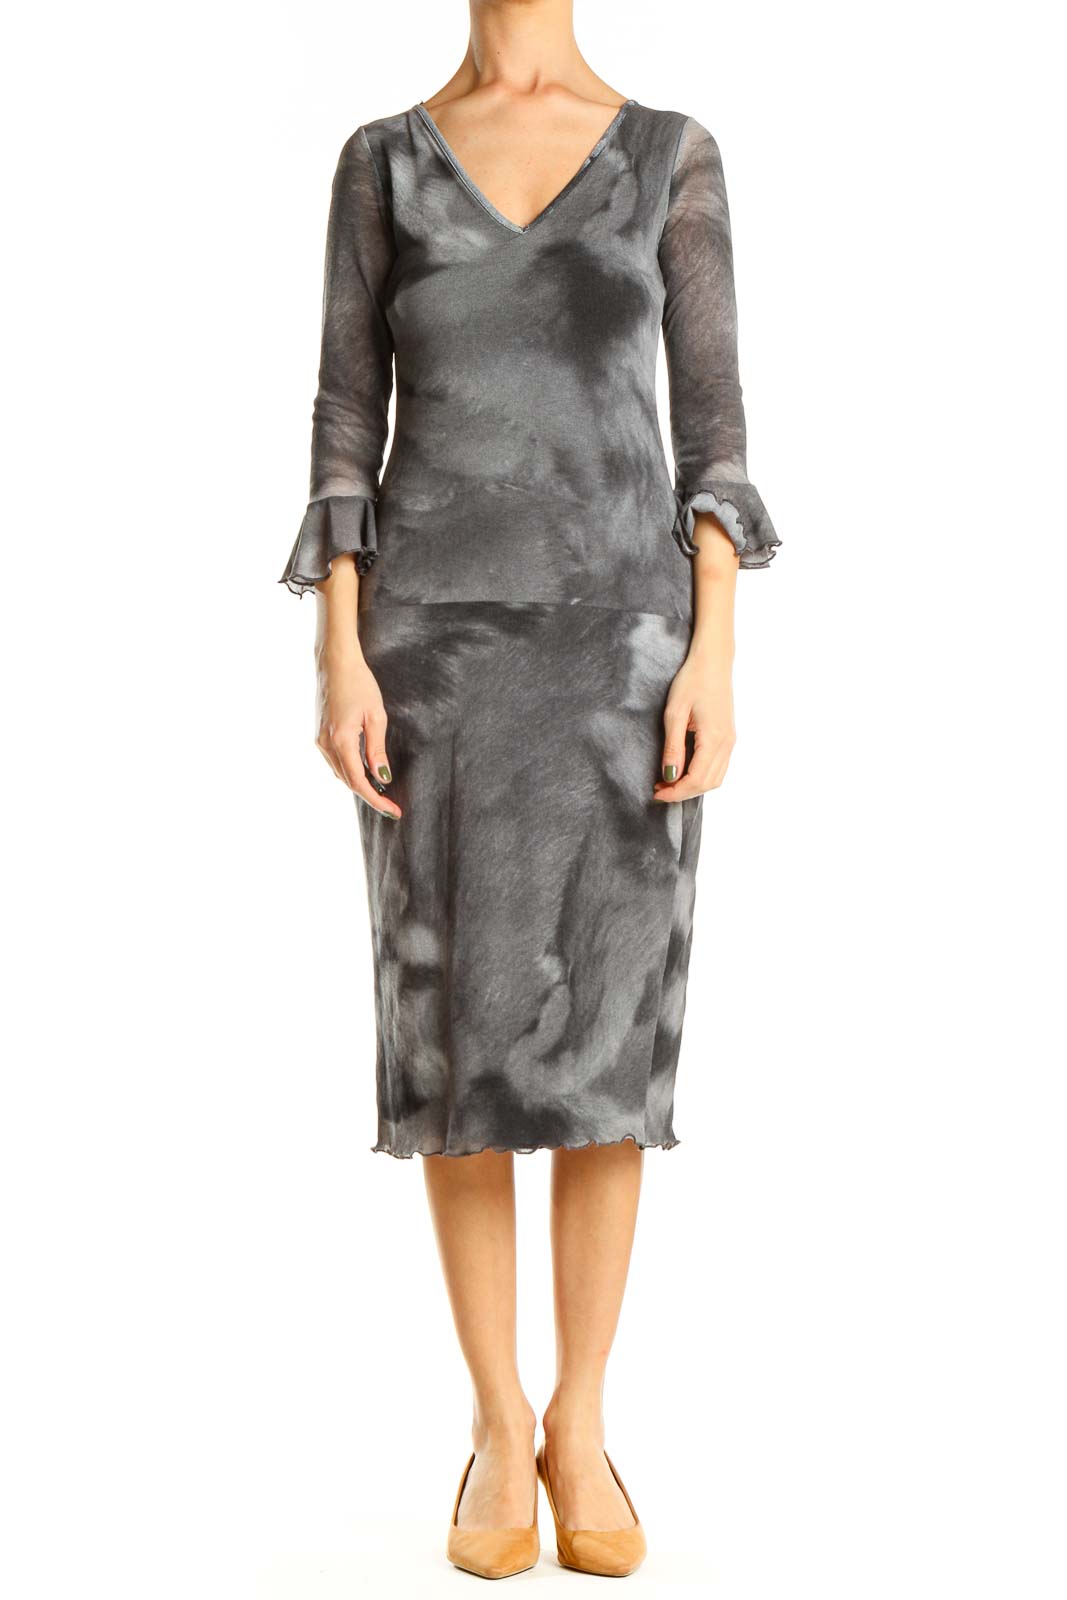 Gray Classic Sheath Dress with Ruffle Sleeves Front